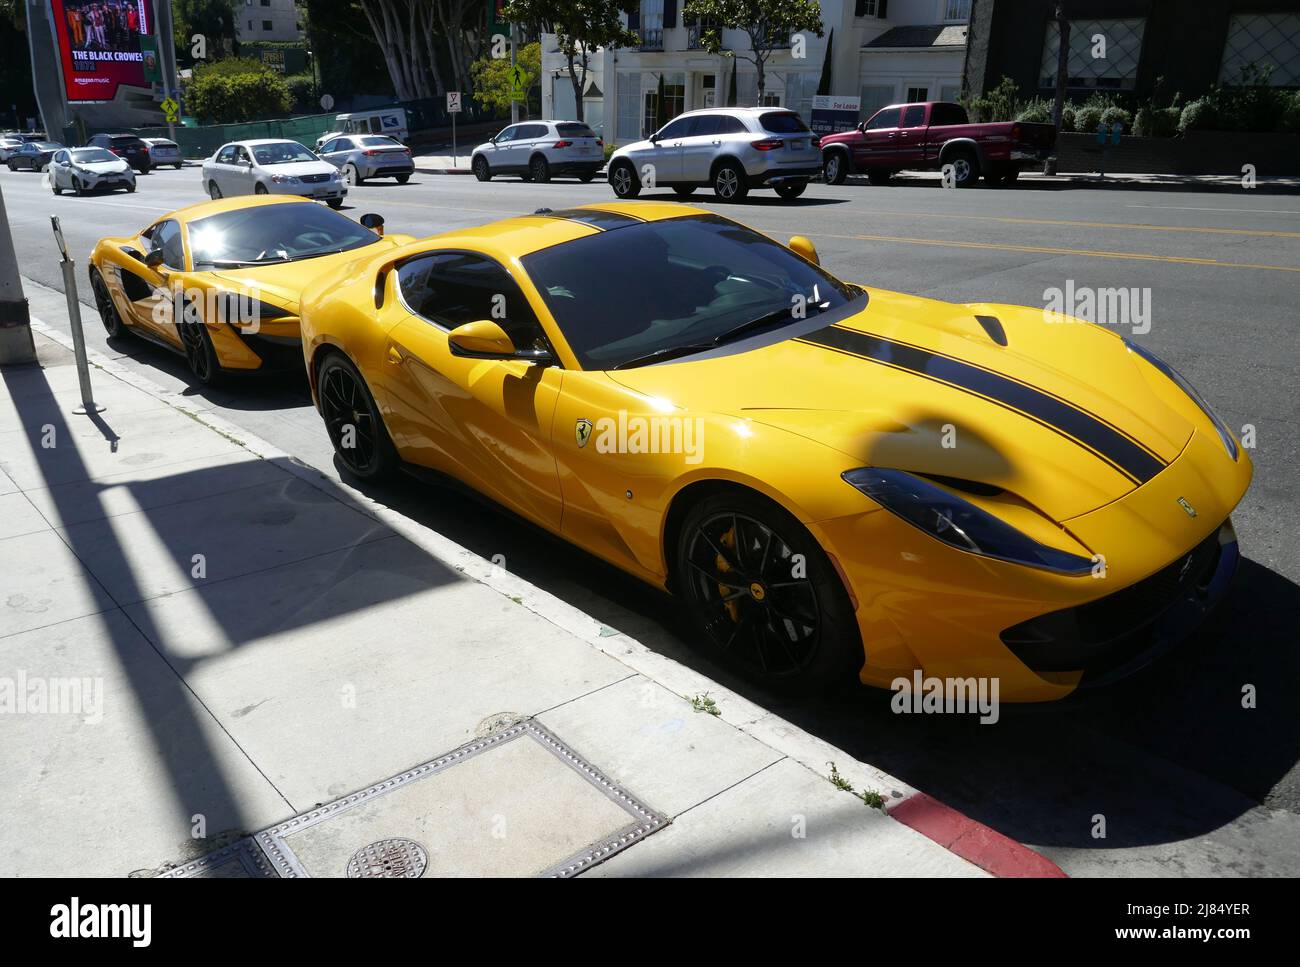 Los Angeles, California, USA 12th May 2022 A general view of atmosphere of Yellow McLaren and Yellow Ferrari on Sunset Blvd on May 12, 2022 in Los Angeles, California, USA. Photo by Barry King/Alamy Stock Photo Stock Photo